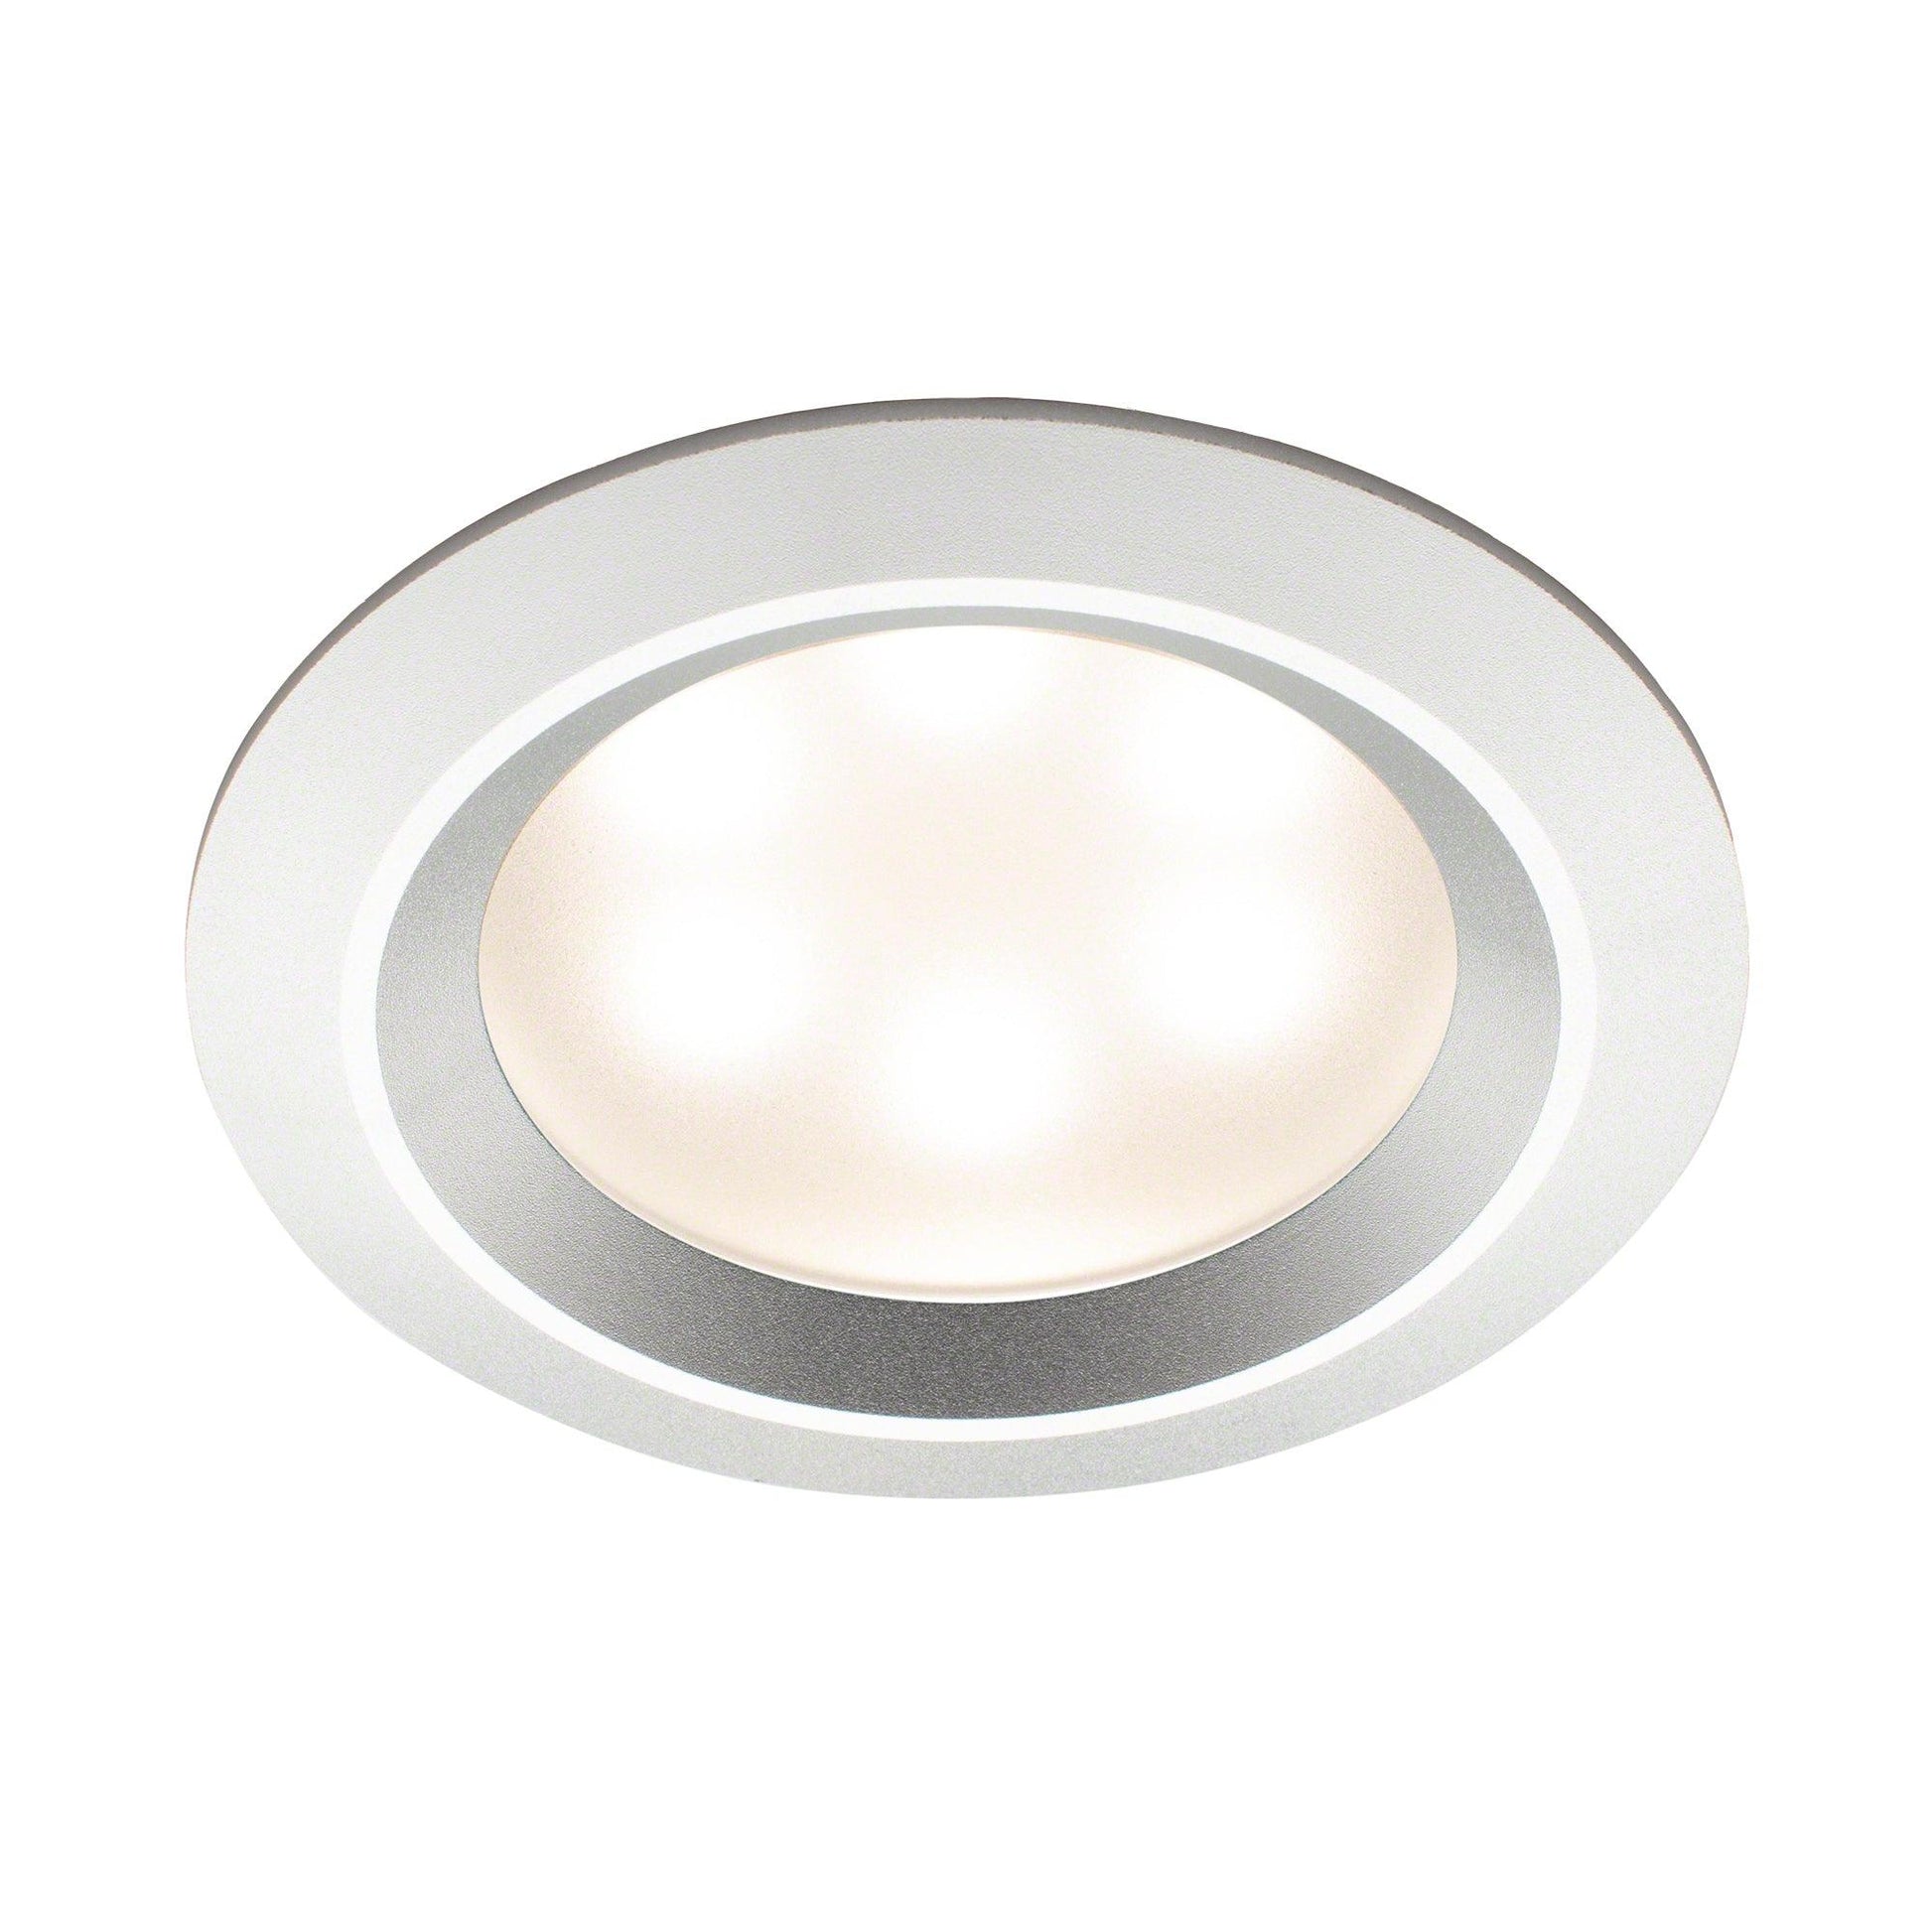 
  
  Mr. Steam Recessed Light With 120V LED Driver
  
